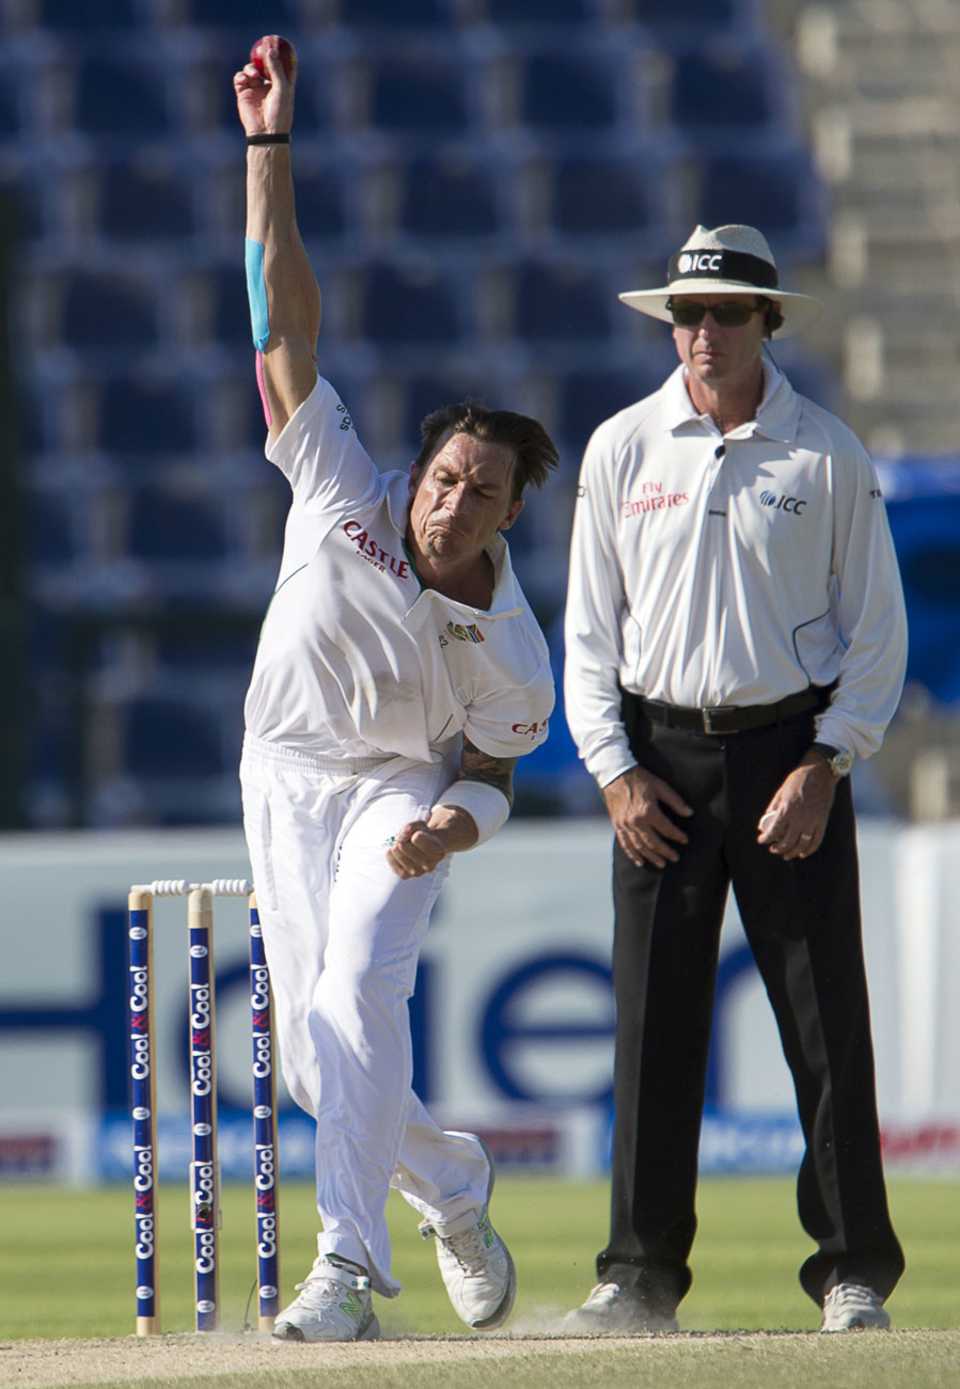 Dale Steyn picked up a wicket in his second over, Pakistan v South Africa, 1st Test, 4th day, Abu Dhabi, October 17, 2013